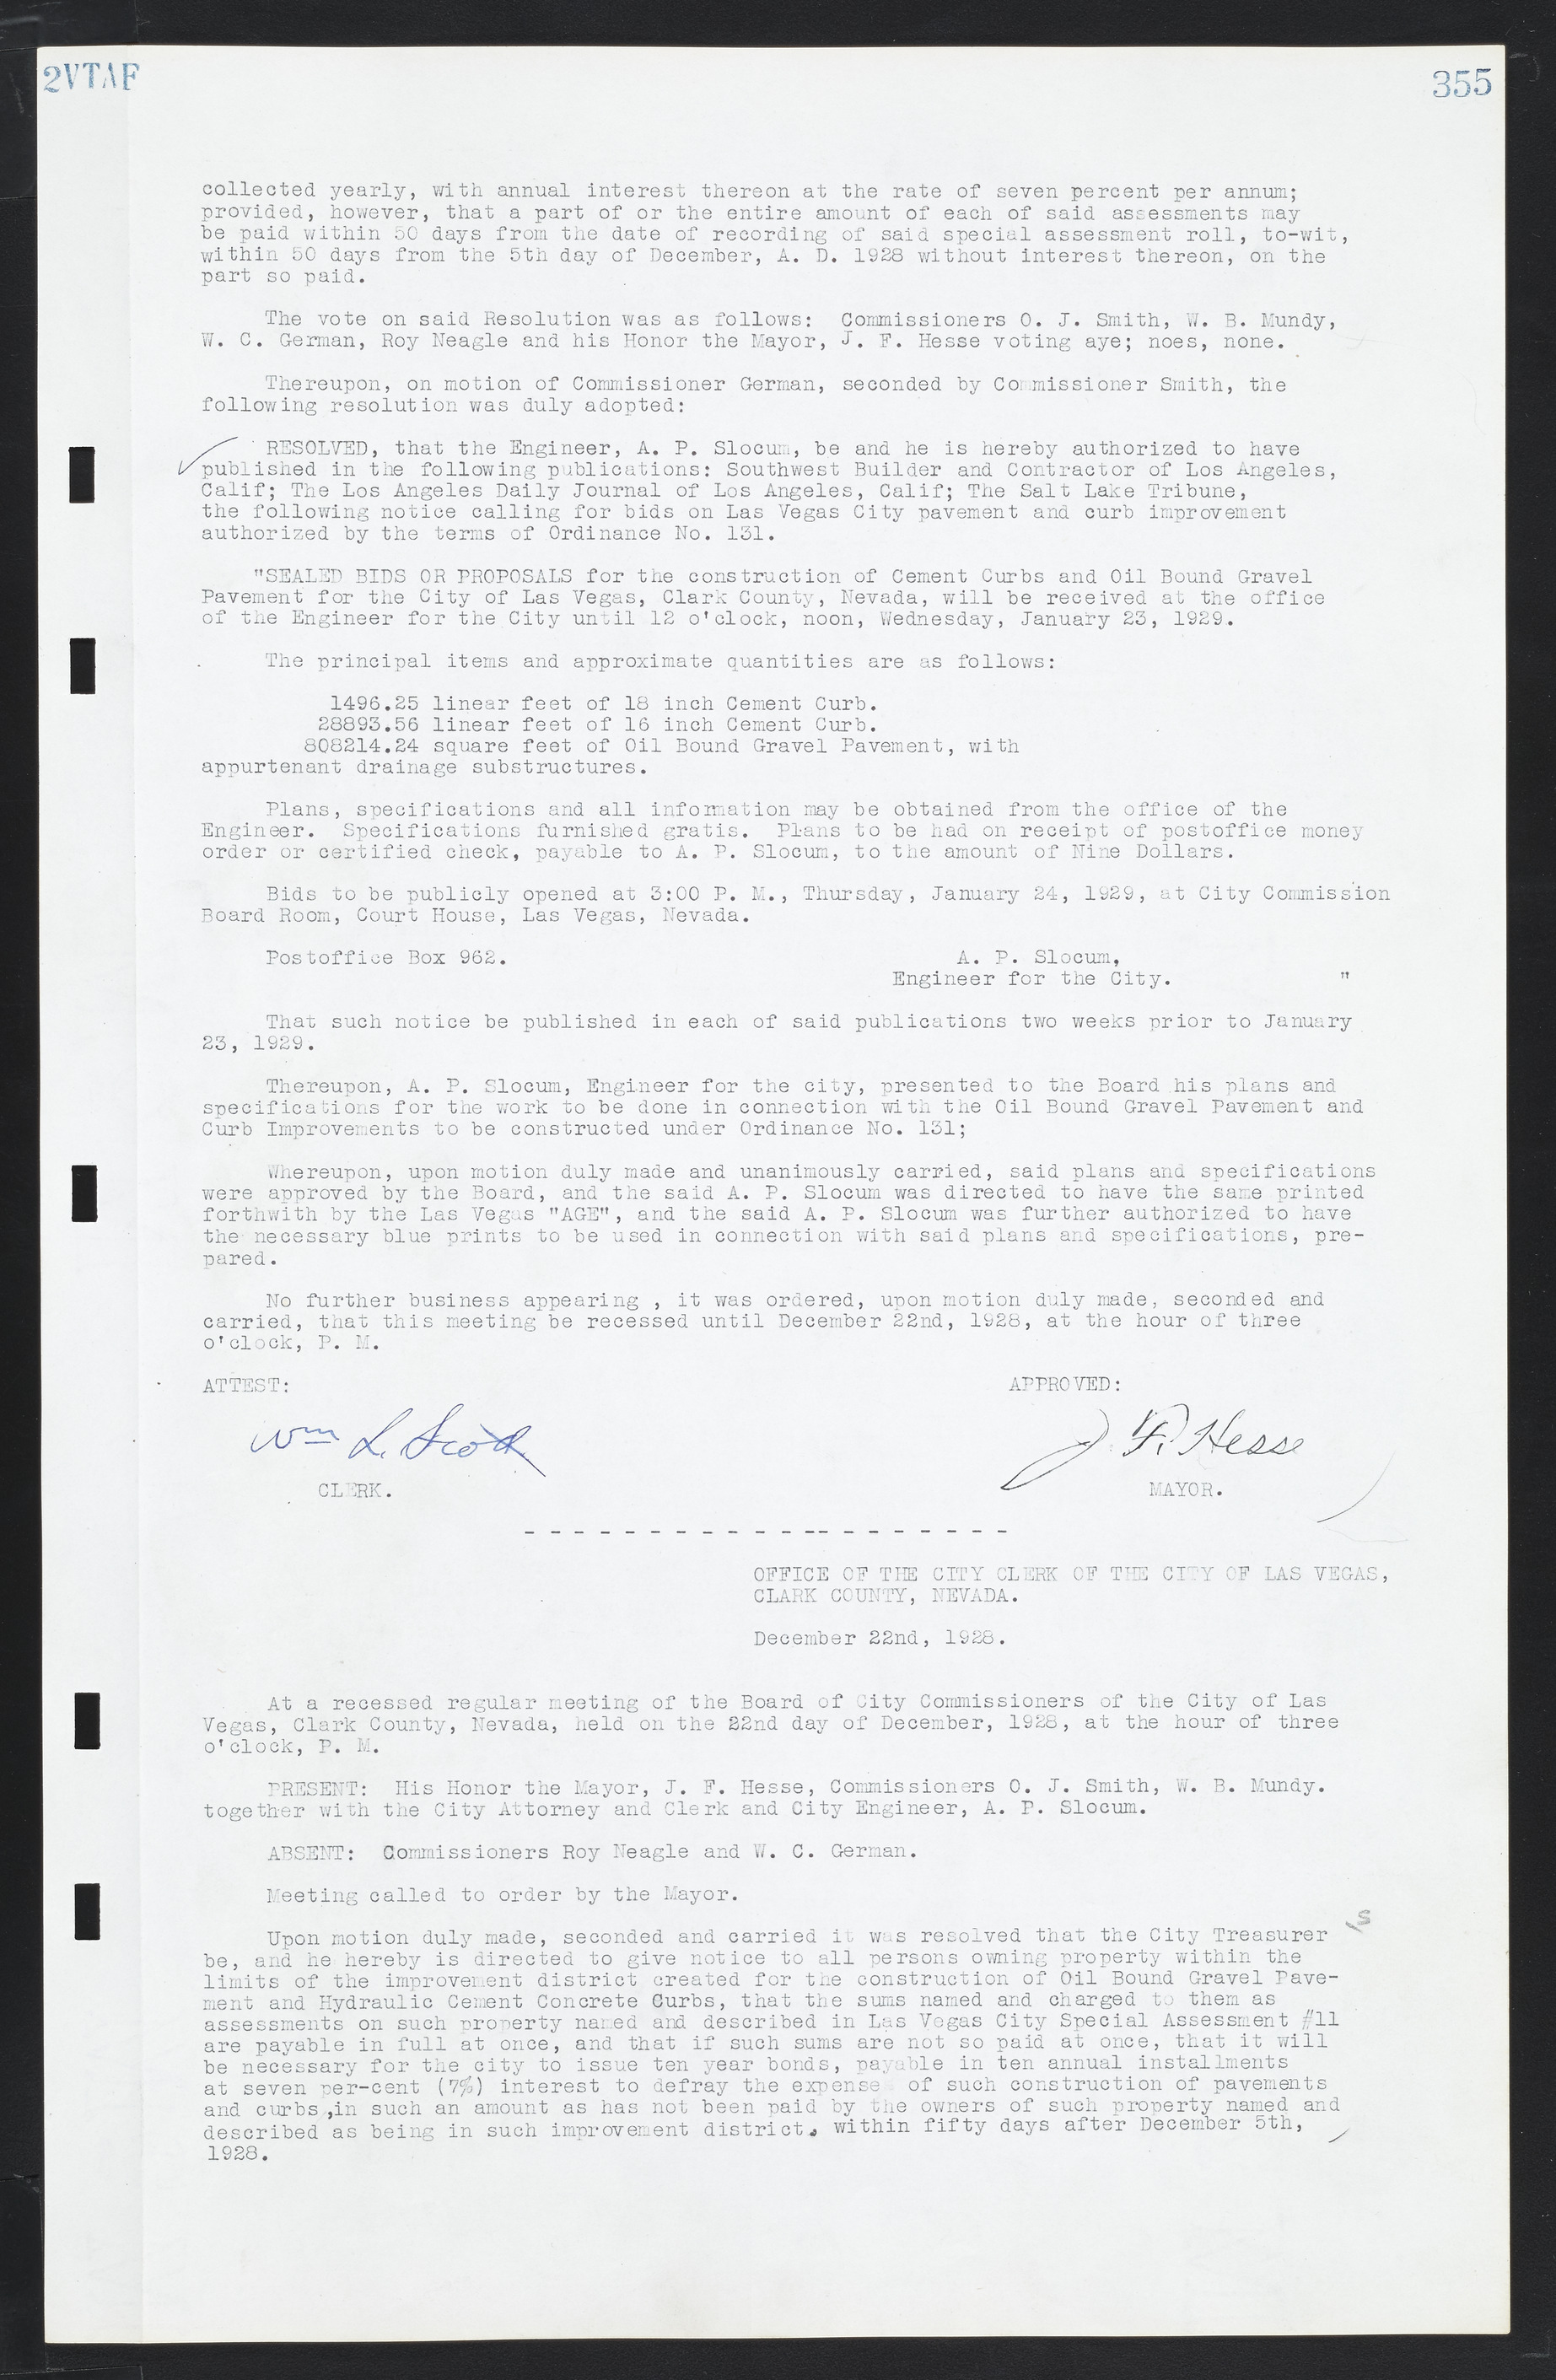 Las Vegas City Commission Minutes, March 1, 1922 to May 10, 1929, lvc000002-364